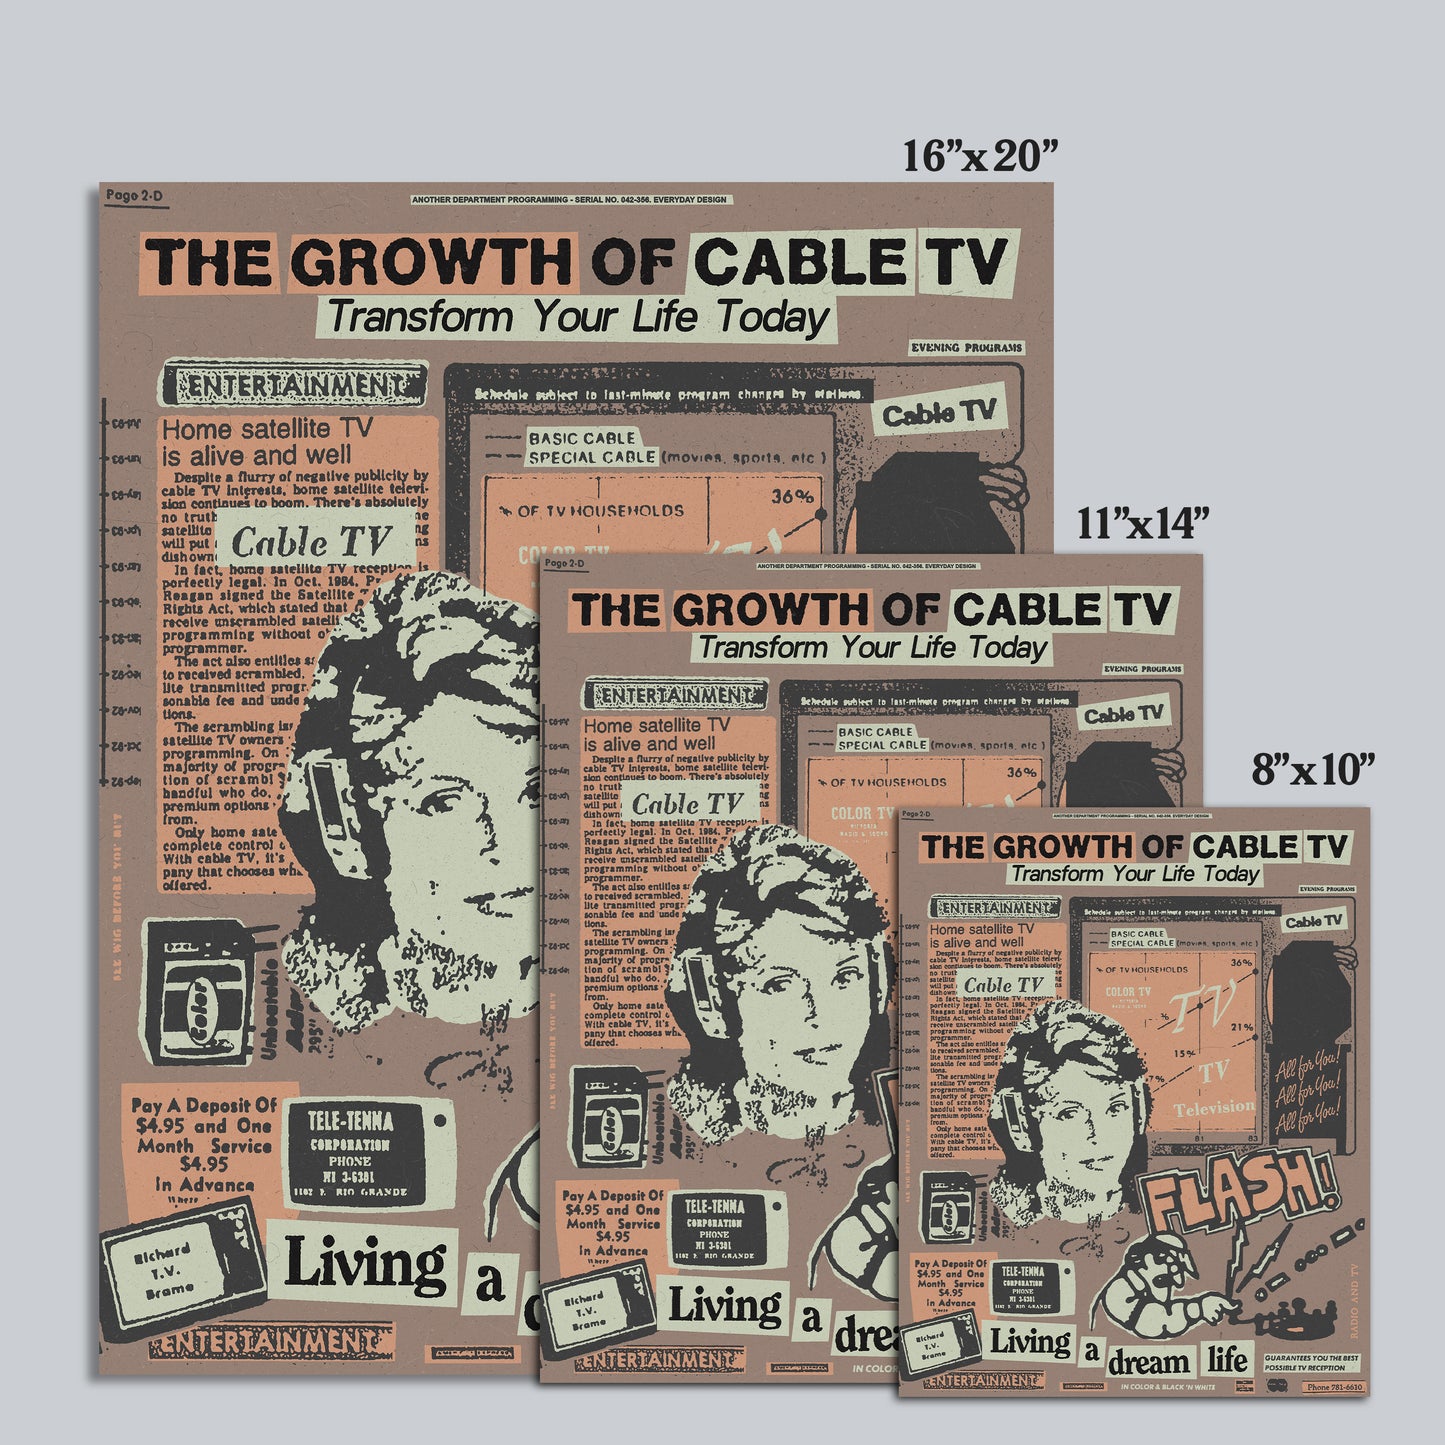 042 - The Growth of Cable TV